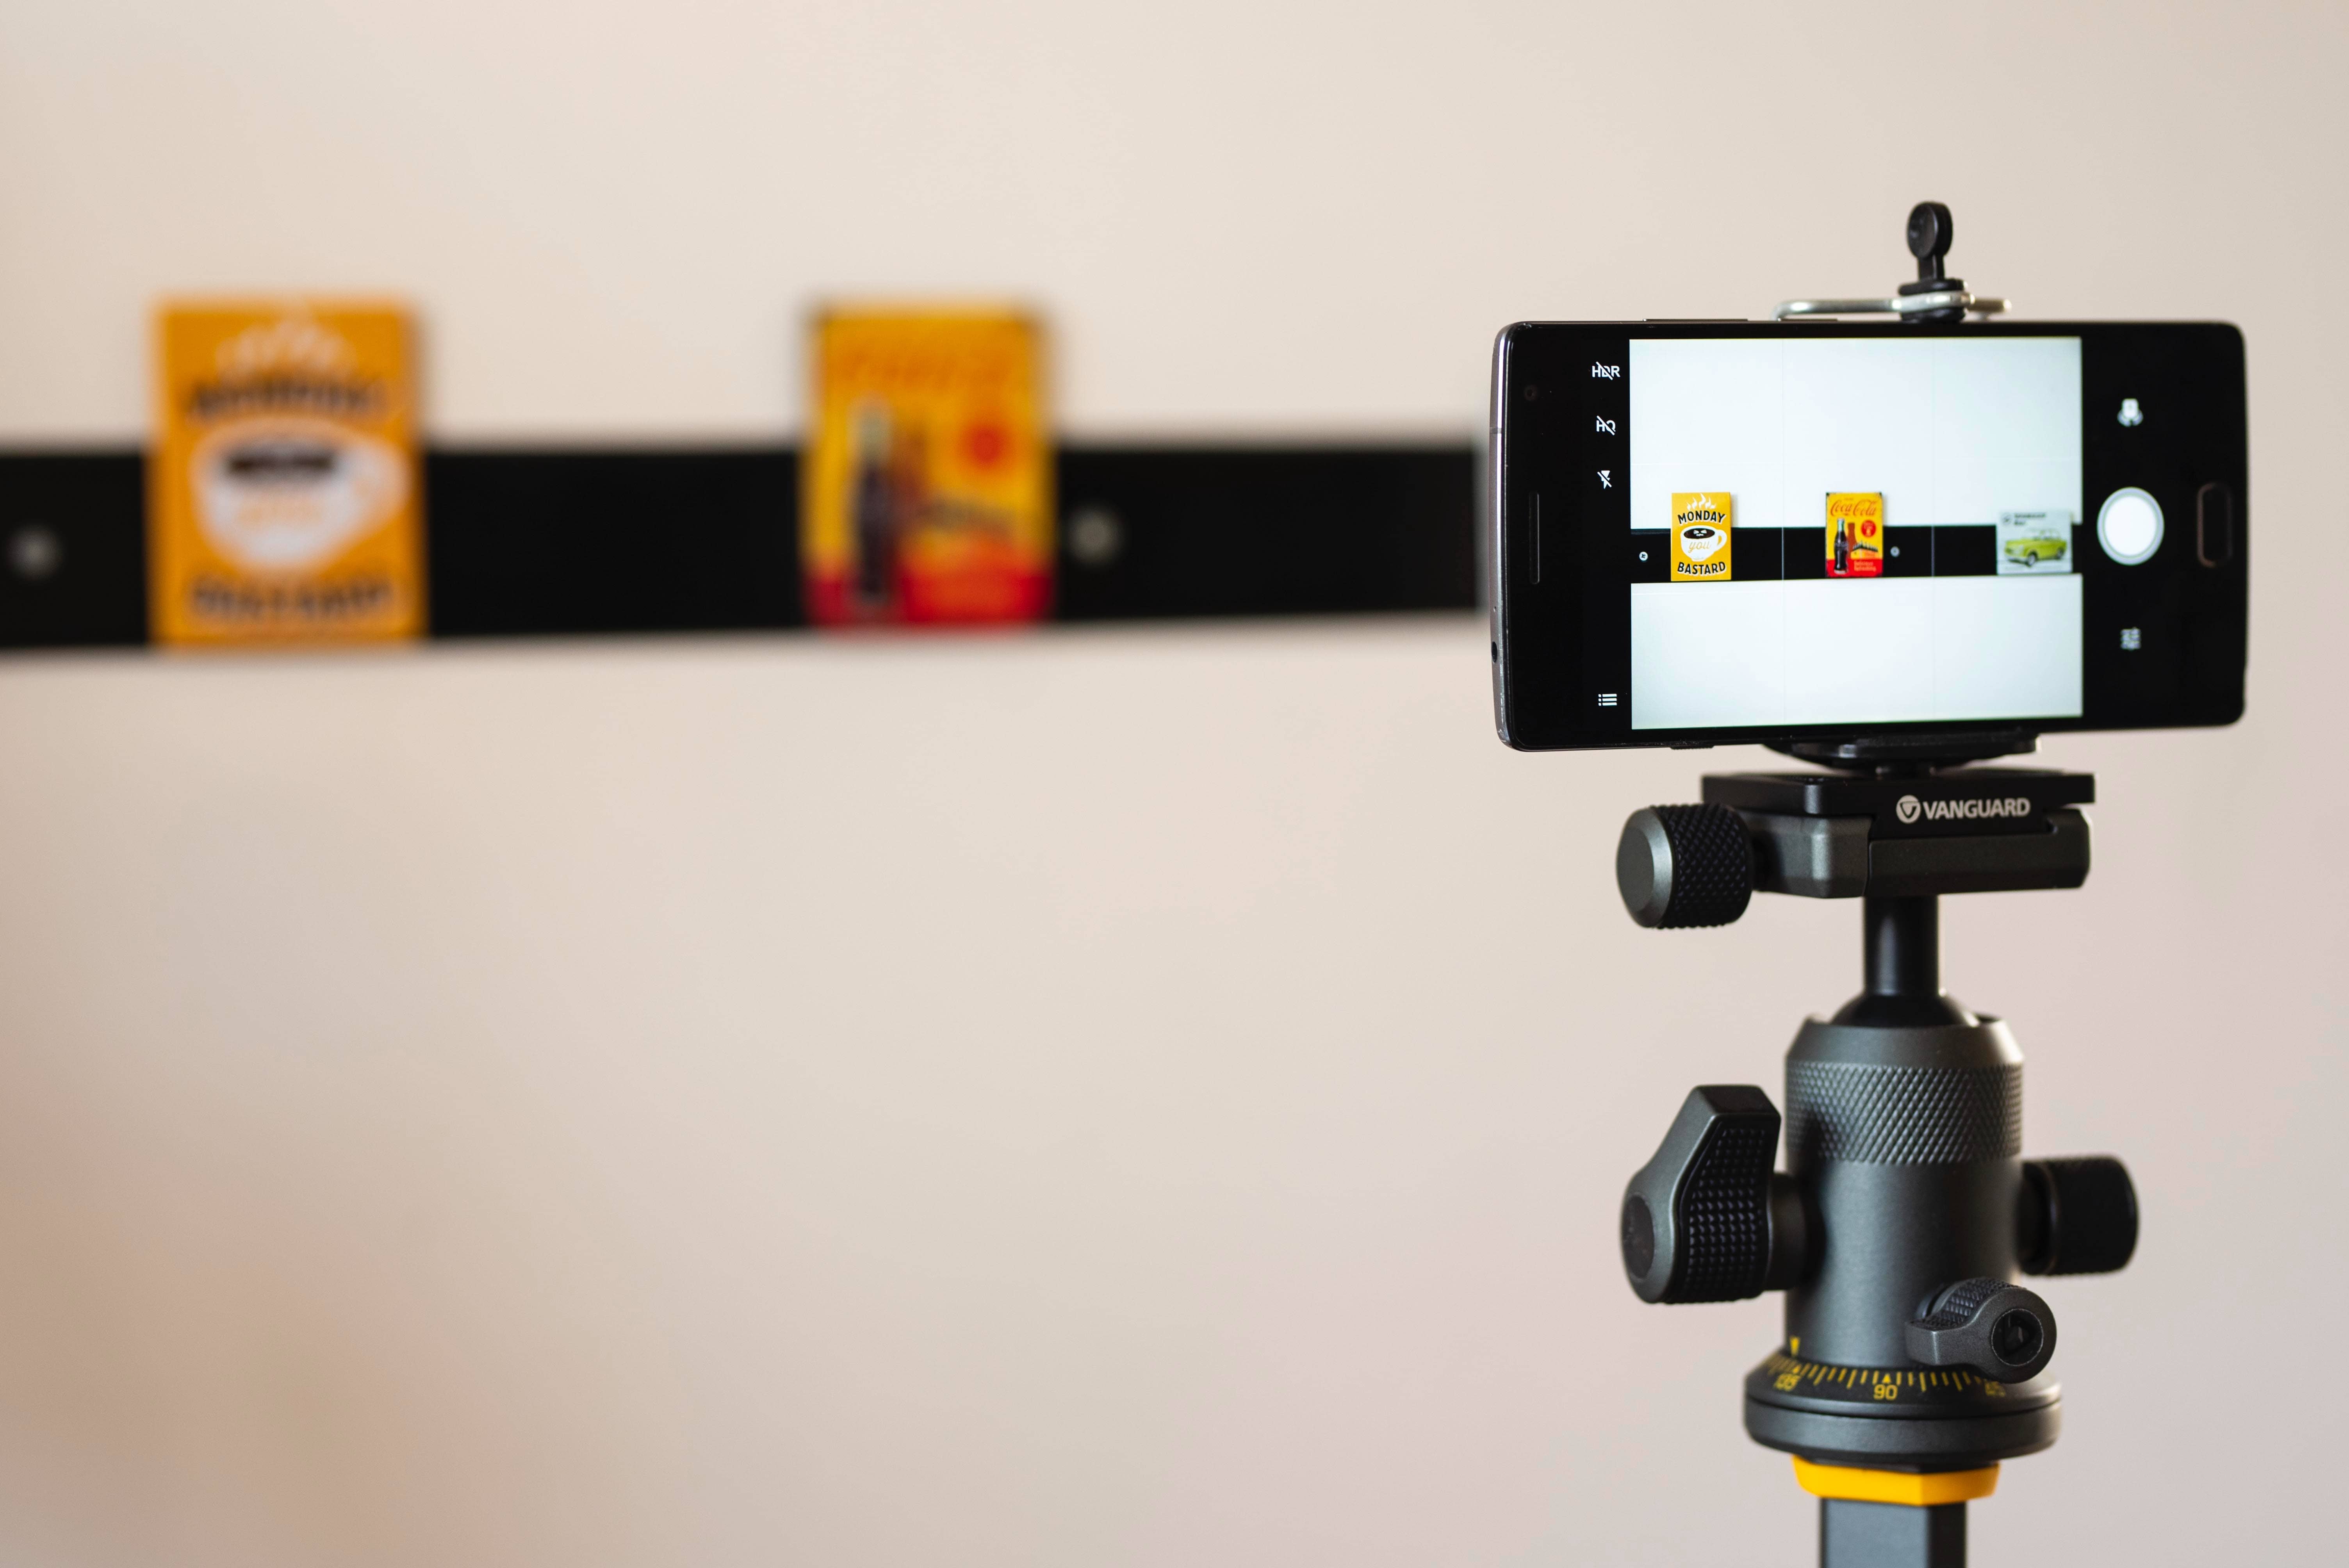 Facebook Live Best Practices - An image of a camera phone on a tripod